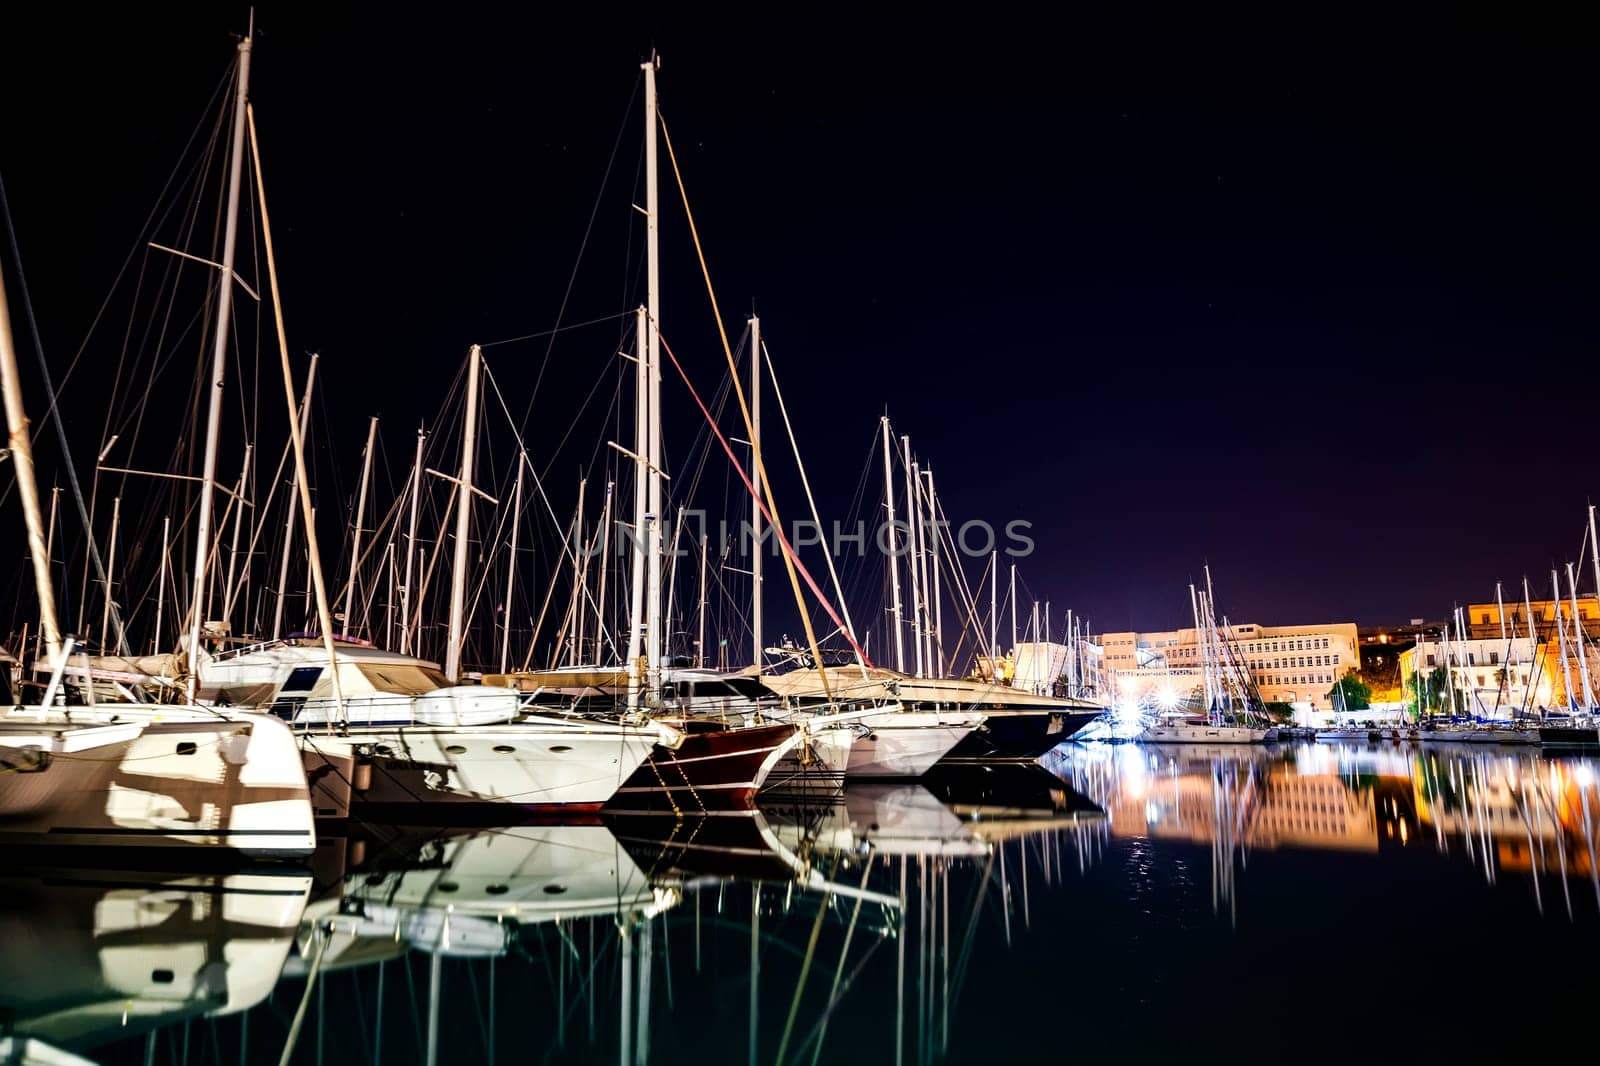 Moored boats and yachts at night in a harbor in Palermo, Sicily by EdVal